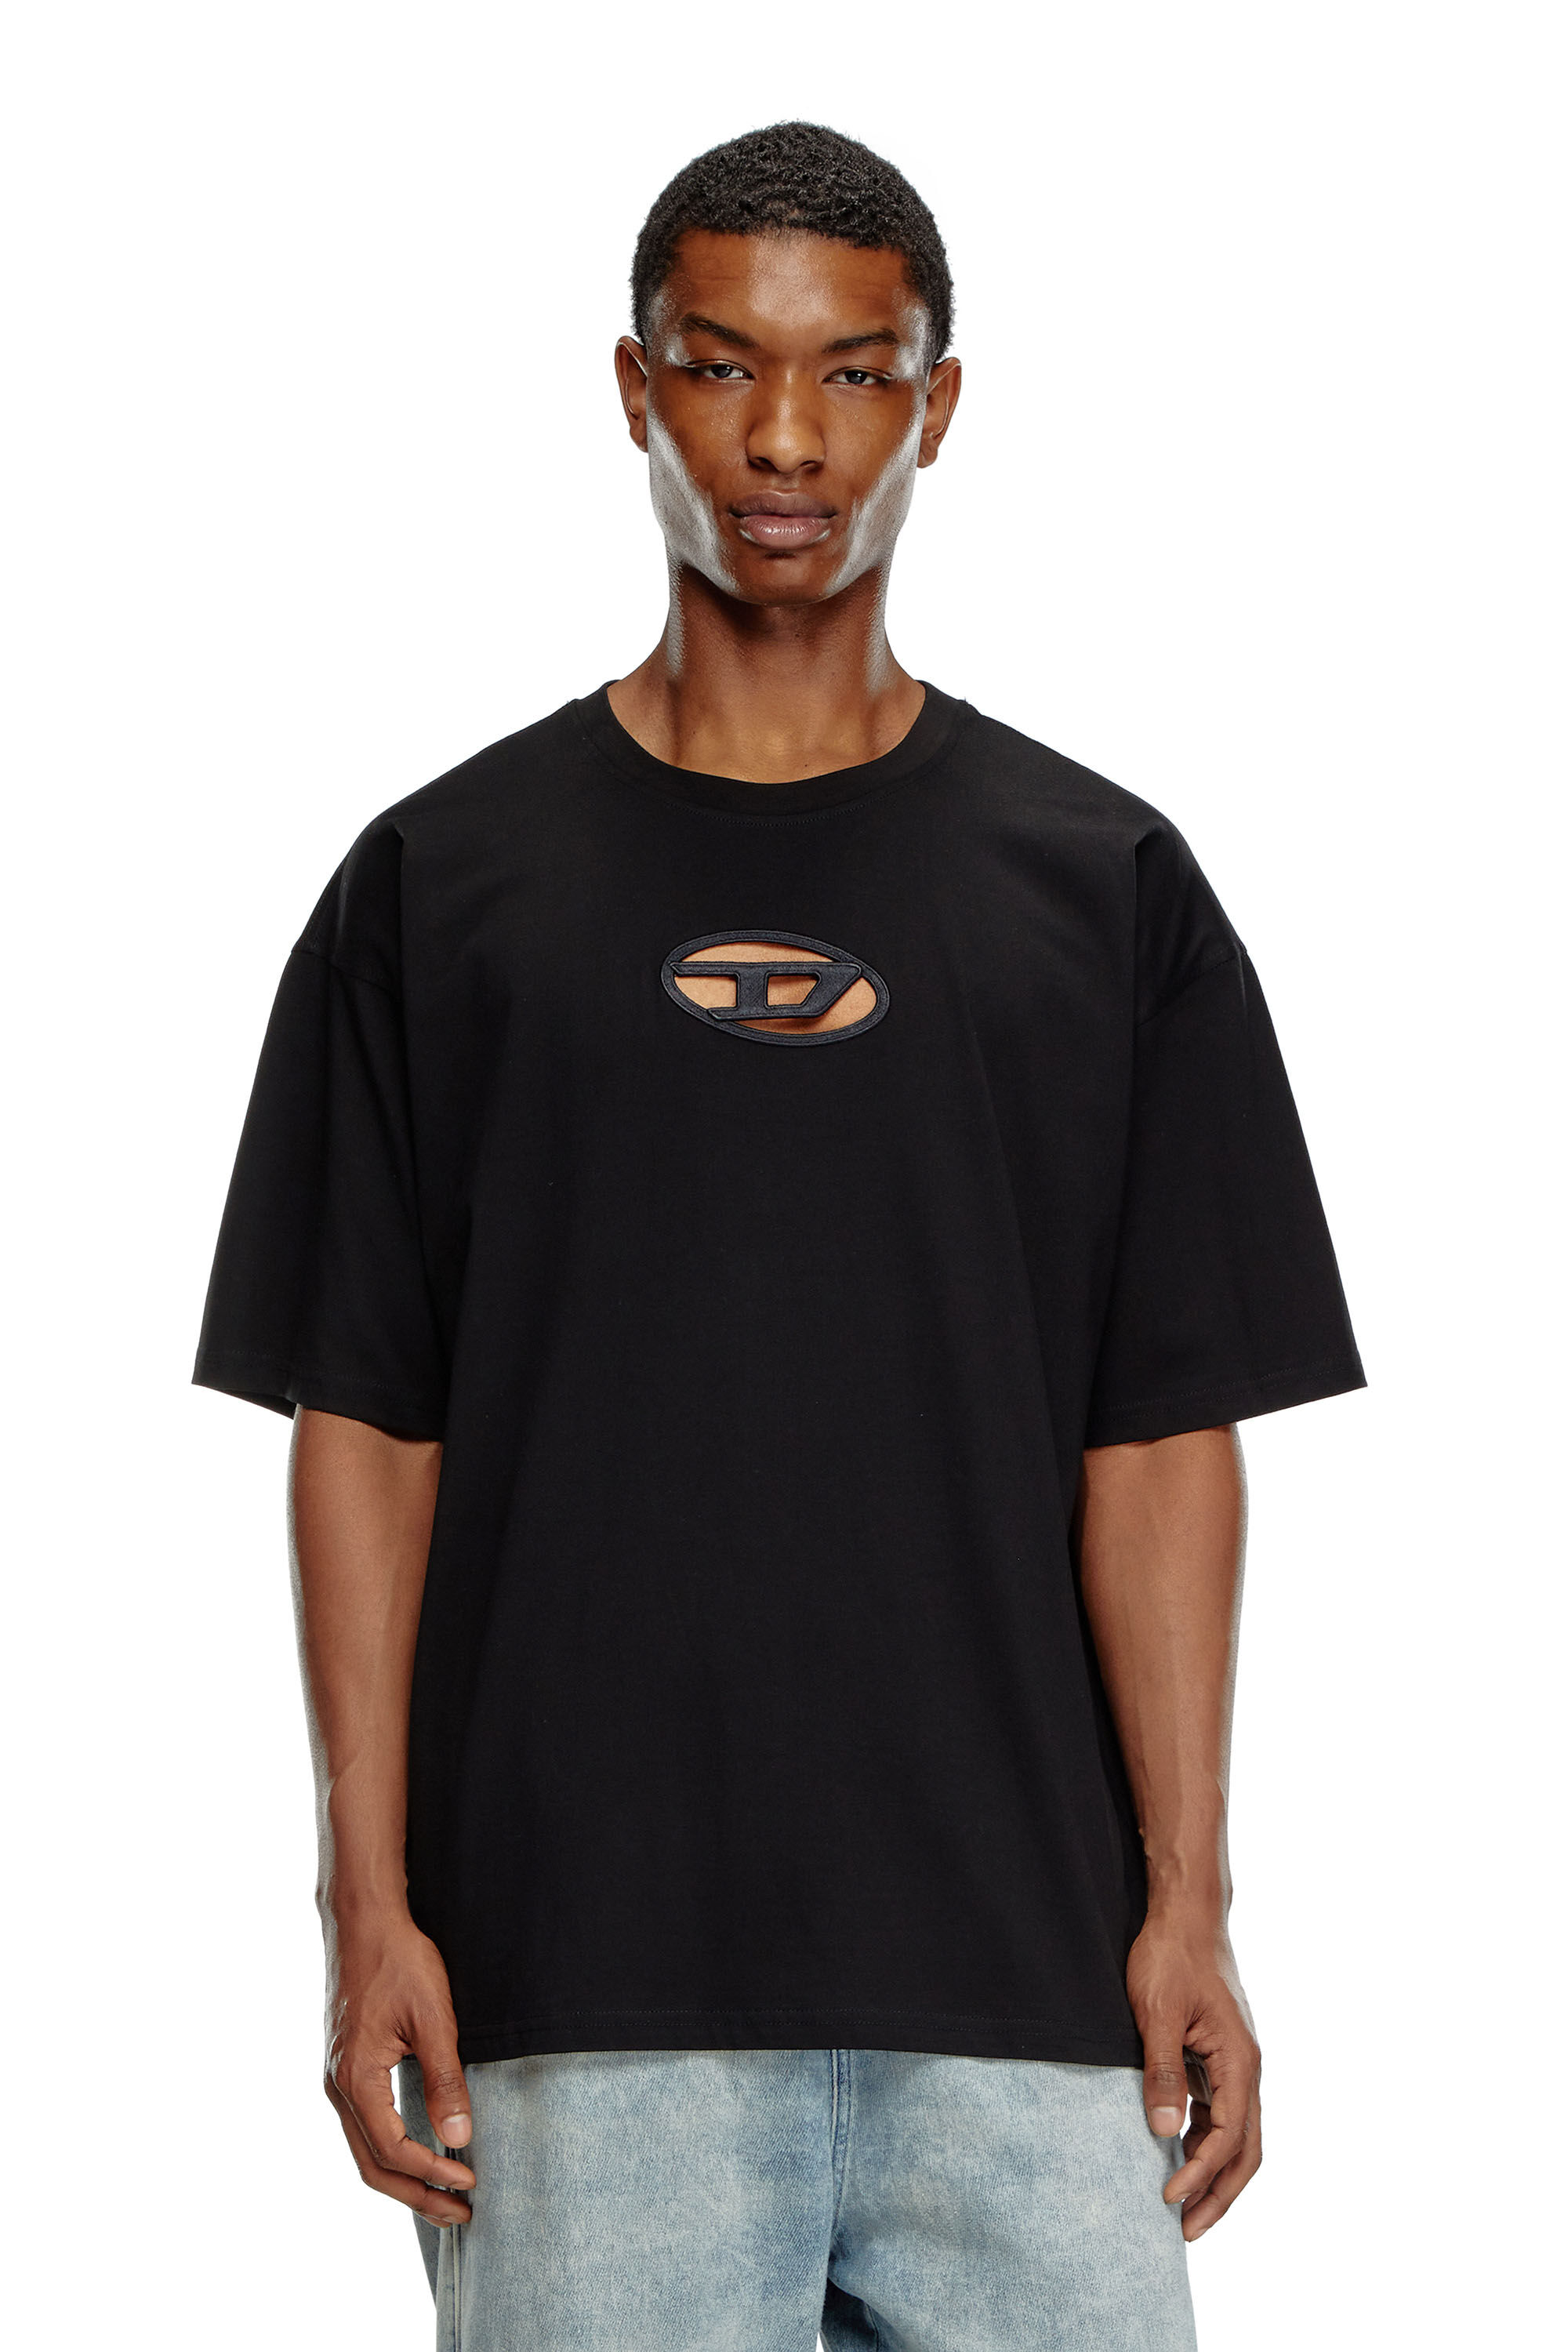 Women's T-shirt with embroidered Oval D | Black | Diesel